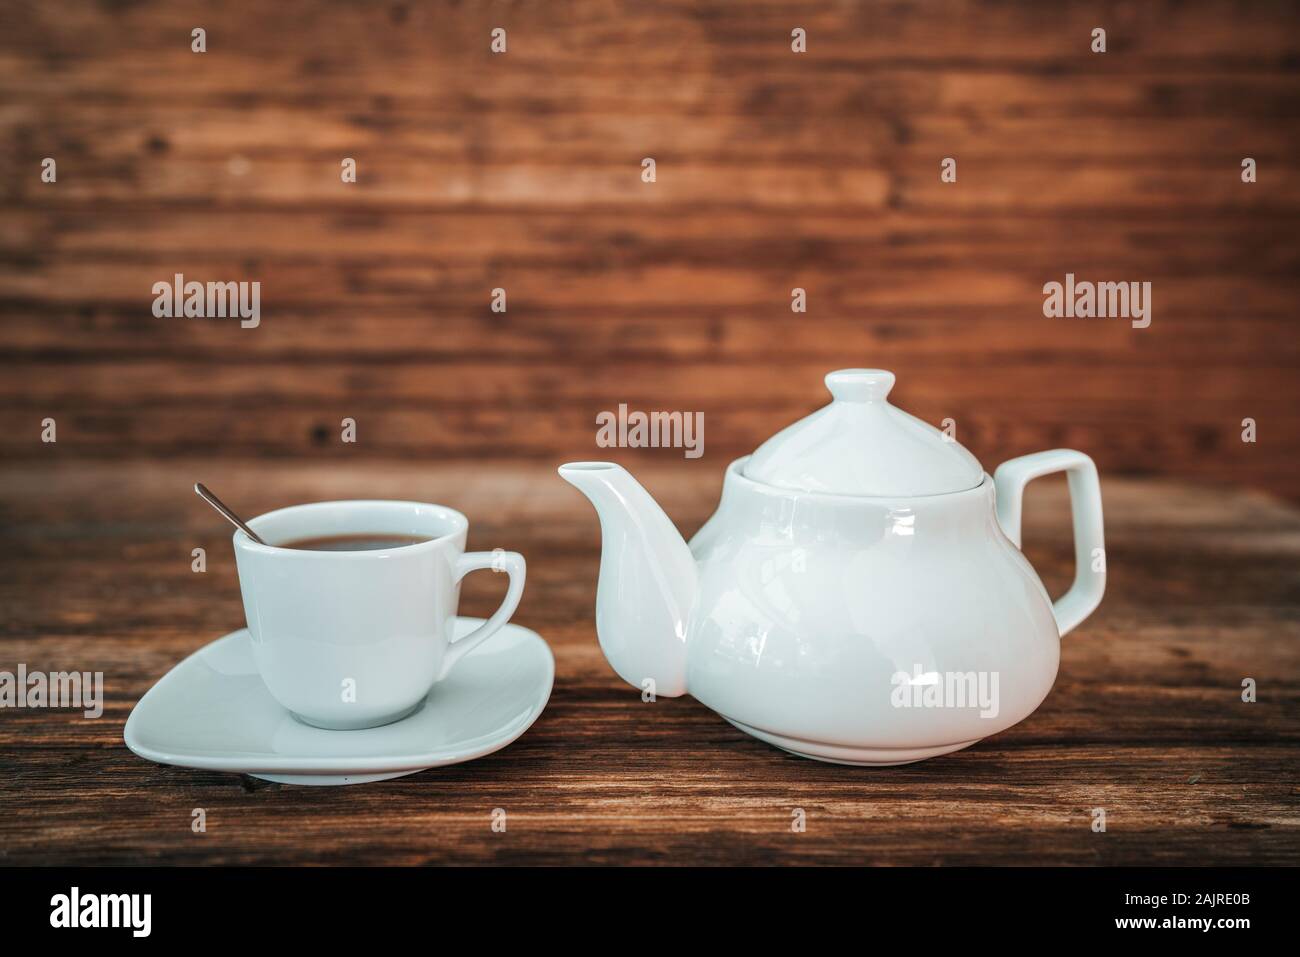 Tea time, brewing tea, cup of freshly brewed tea, warm soft and light, with wooden background. Stock Photo